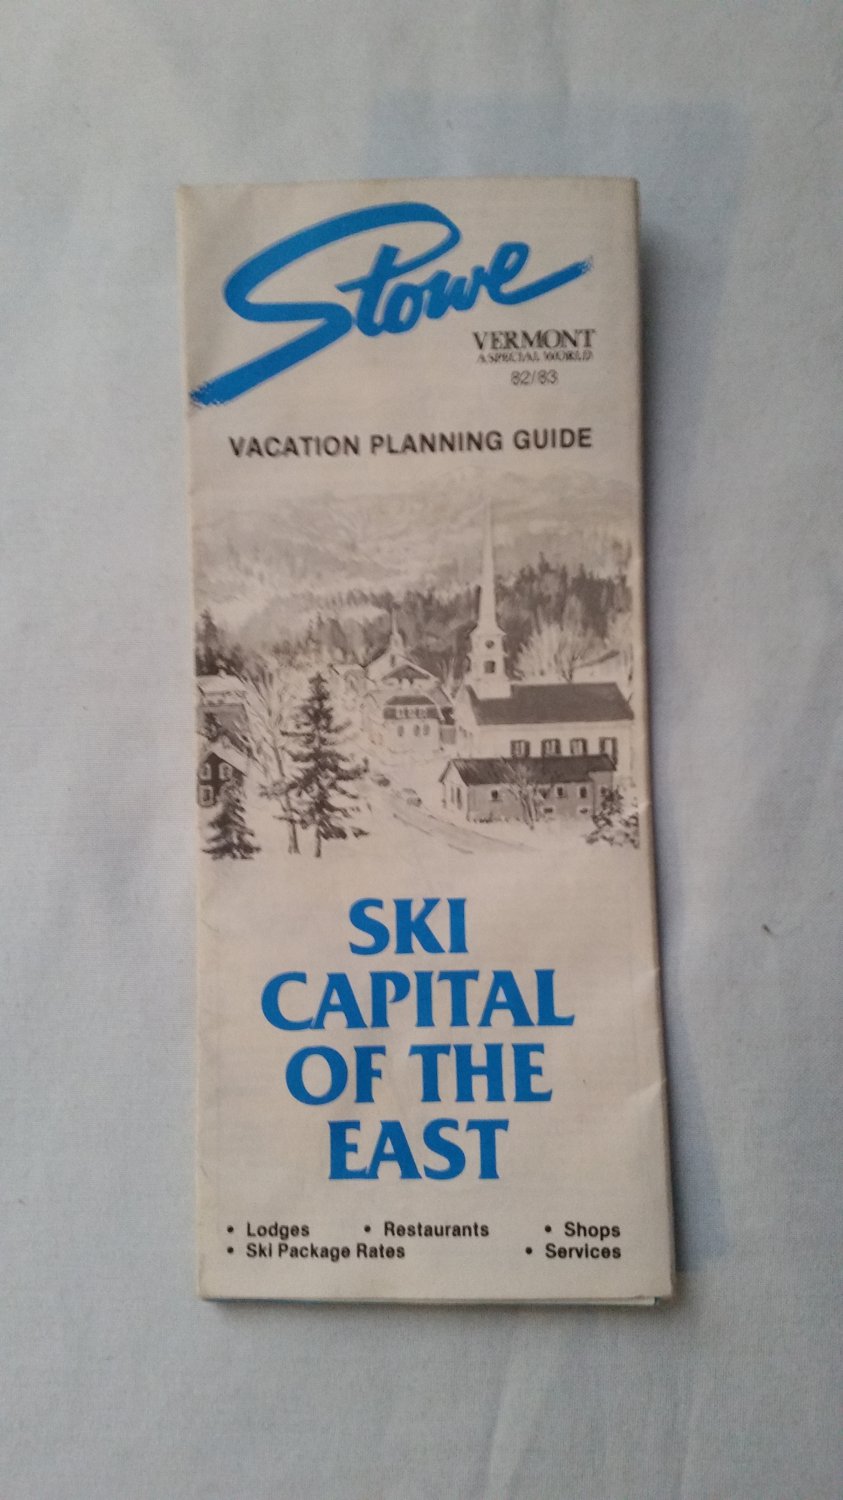 Stowe Vermont Vacation Planning Guide 82/83